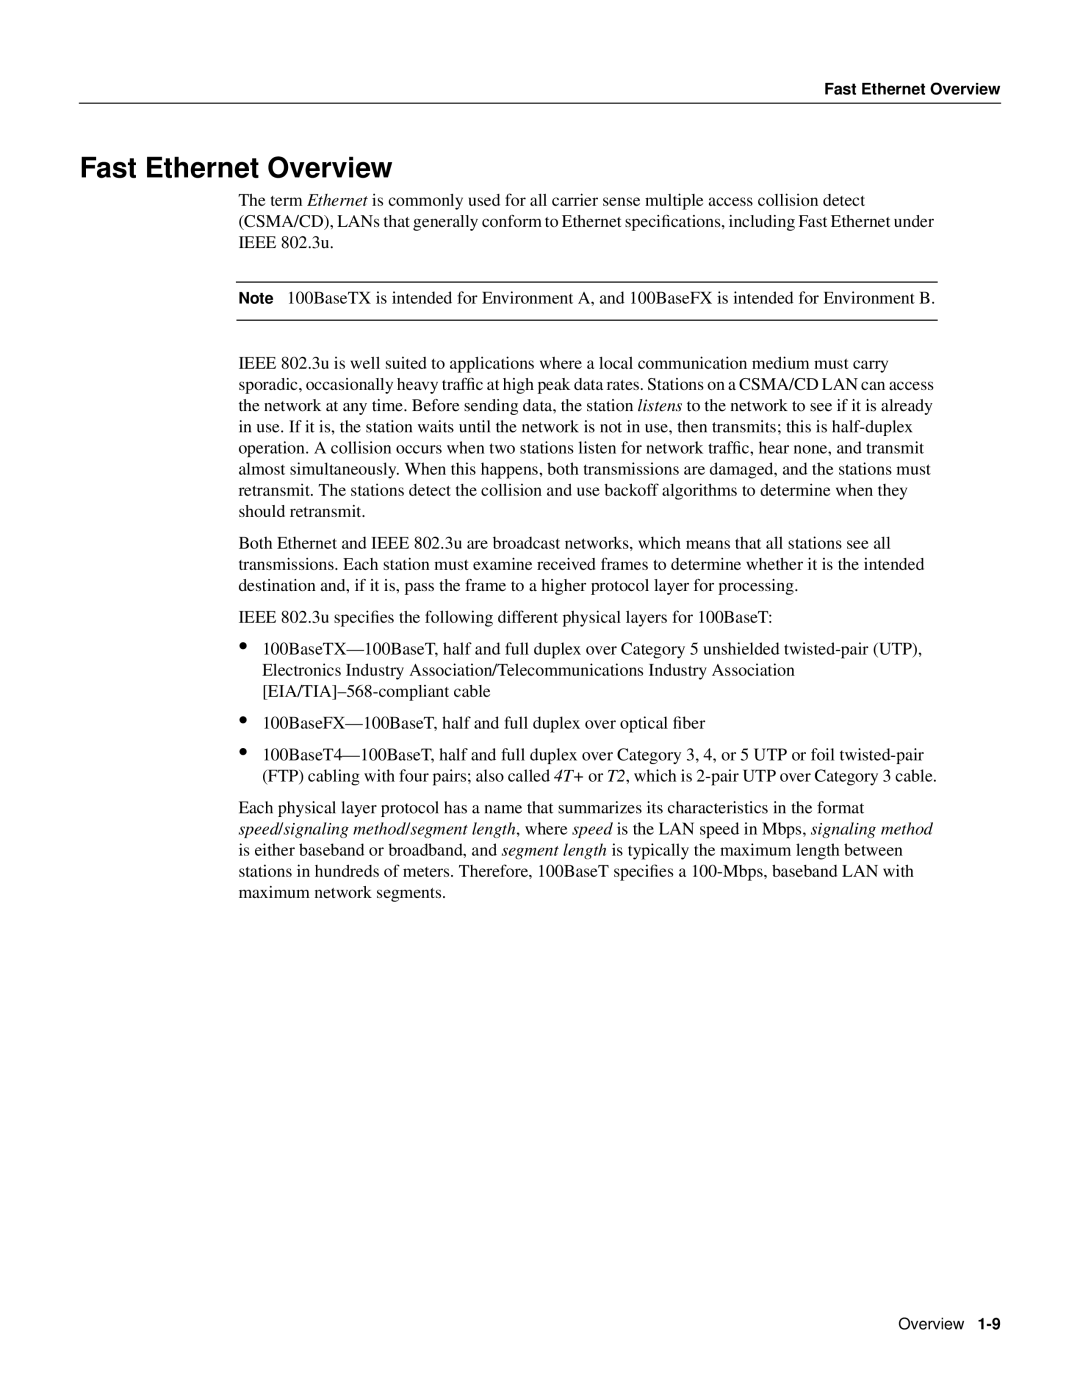 Cisco Systems PA-FE-FX, PA-FE-TX manual Fast Ethernet Overview 